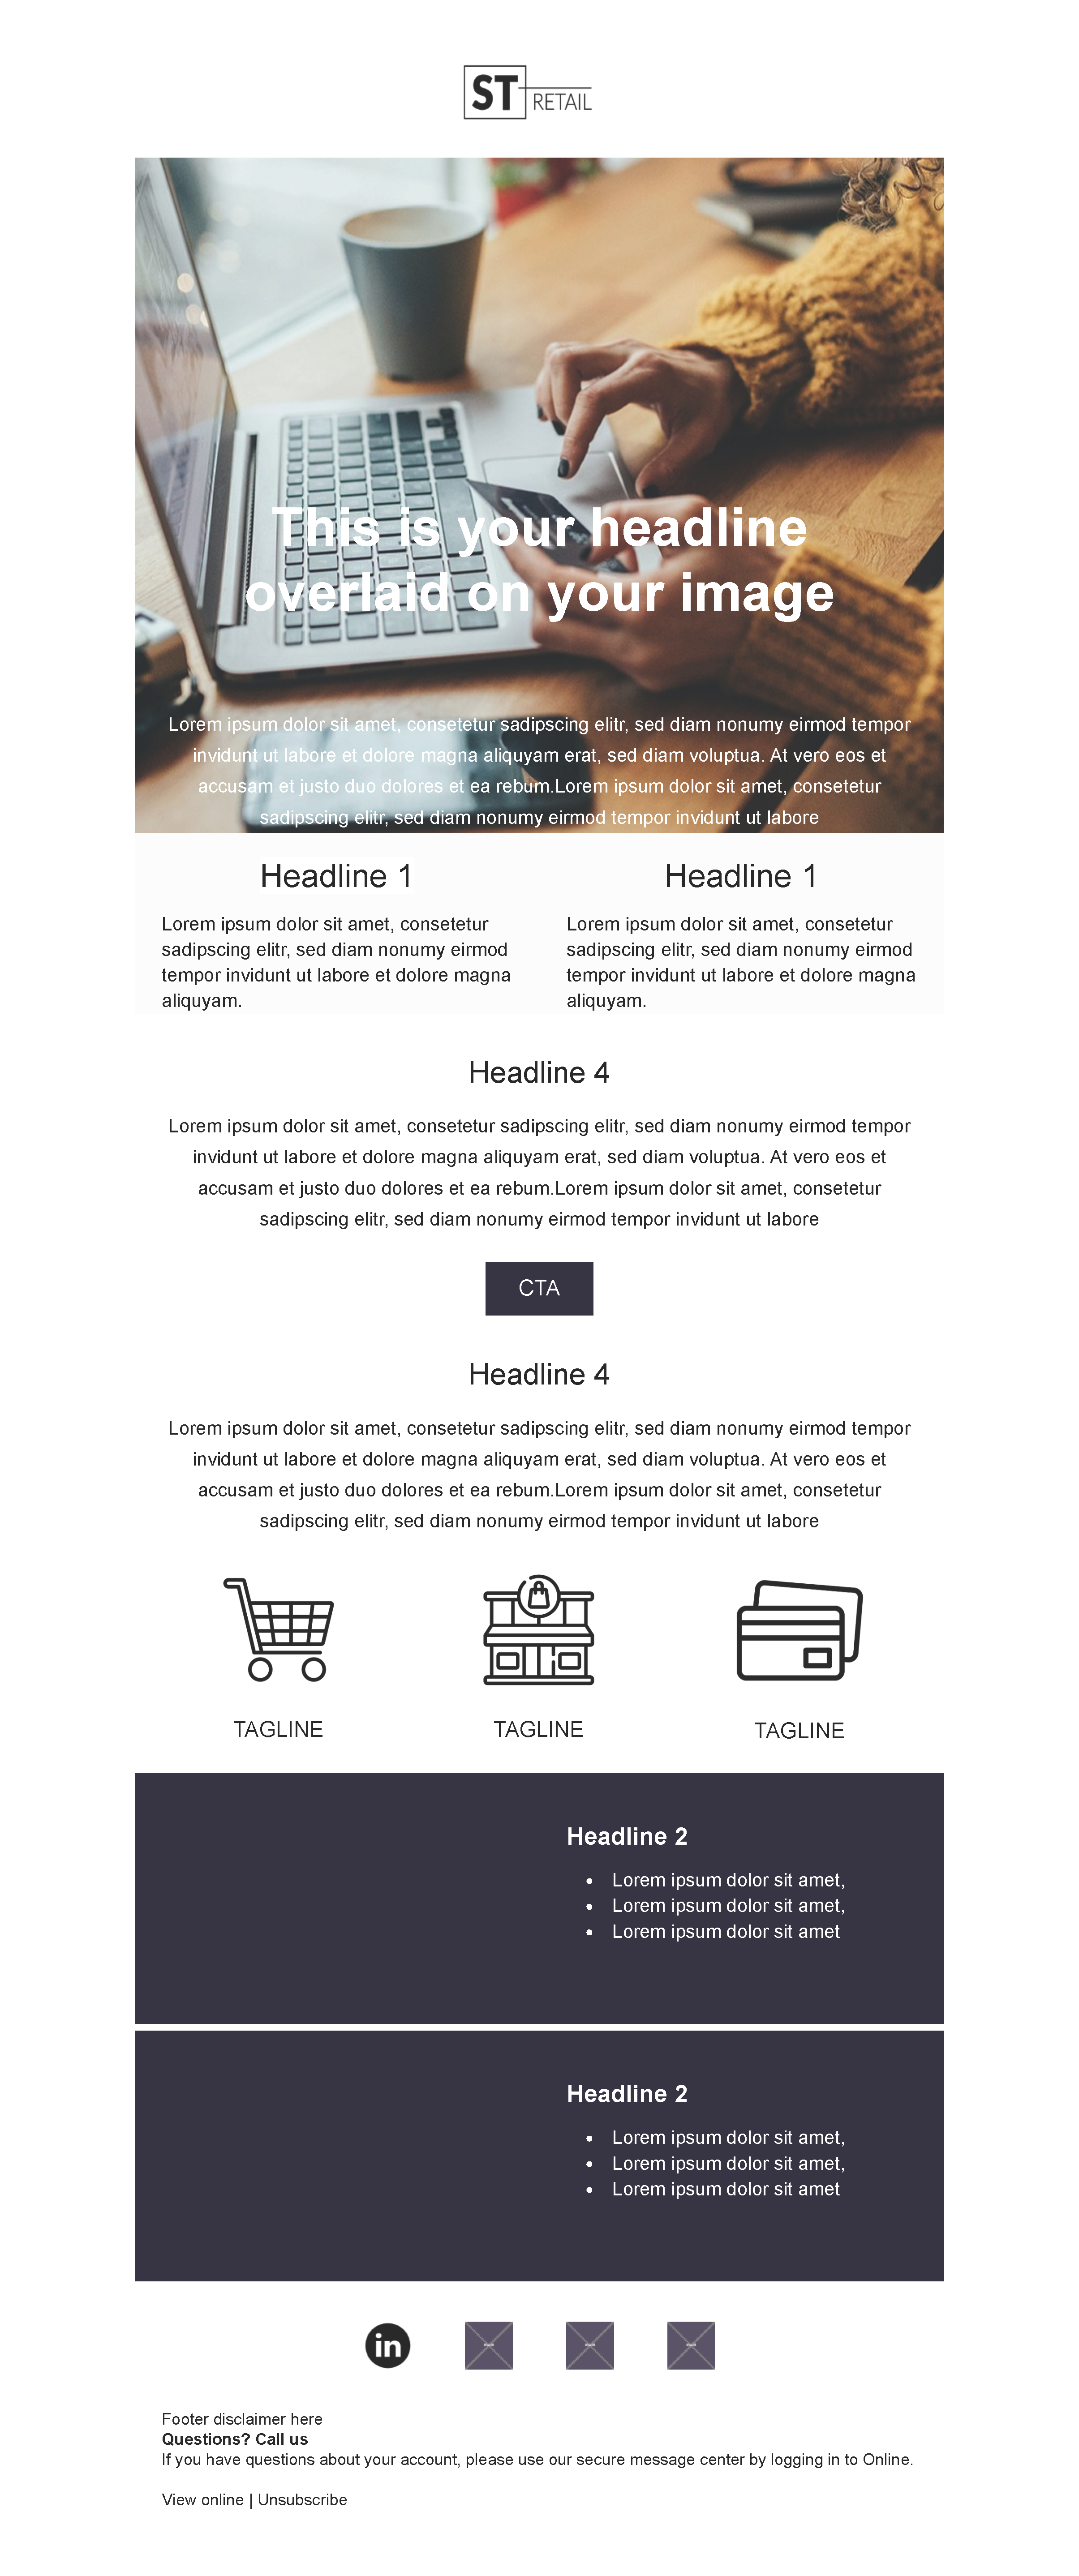 Newsletter email template 3 for Retail companies